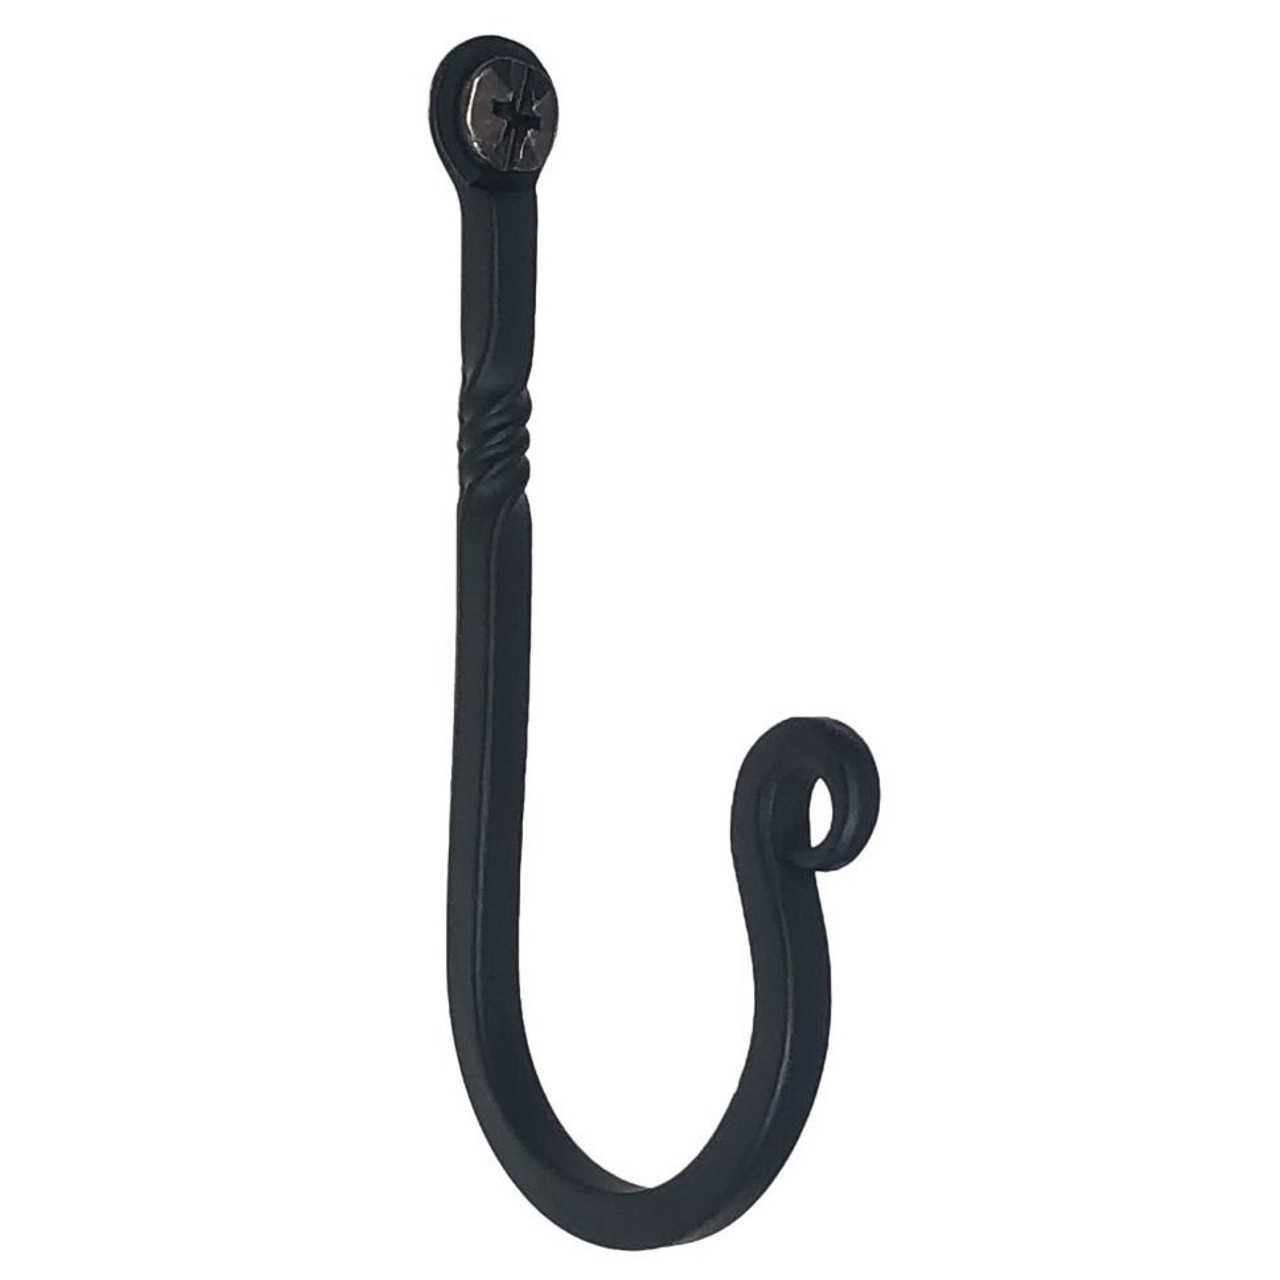 Acorn Hand Forged Utility Hook AM9BP